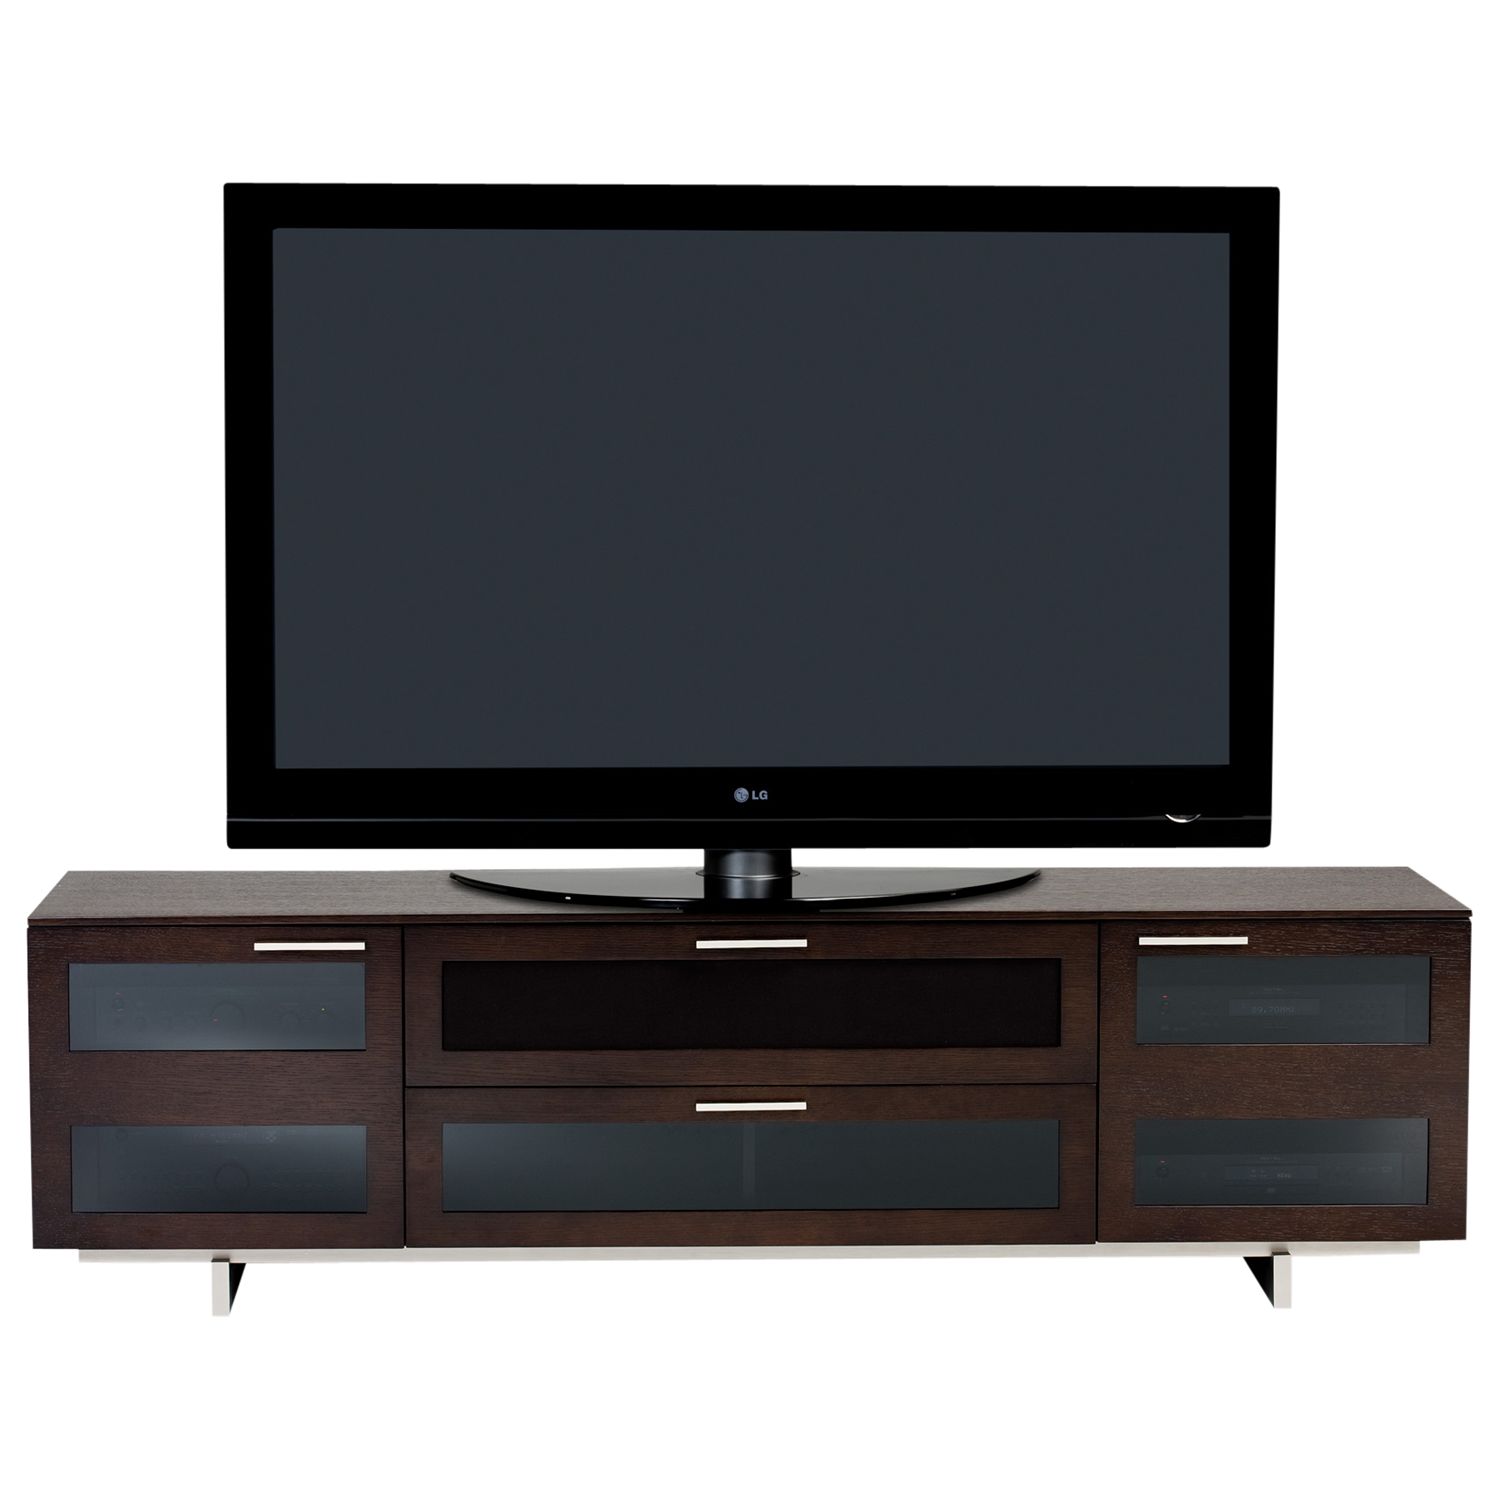 BDI Avion 8929 TV Stand for up to 75-inch TVs, Espresso Stained Oak, width 196cm